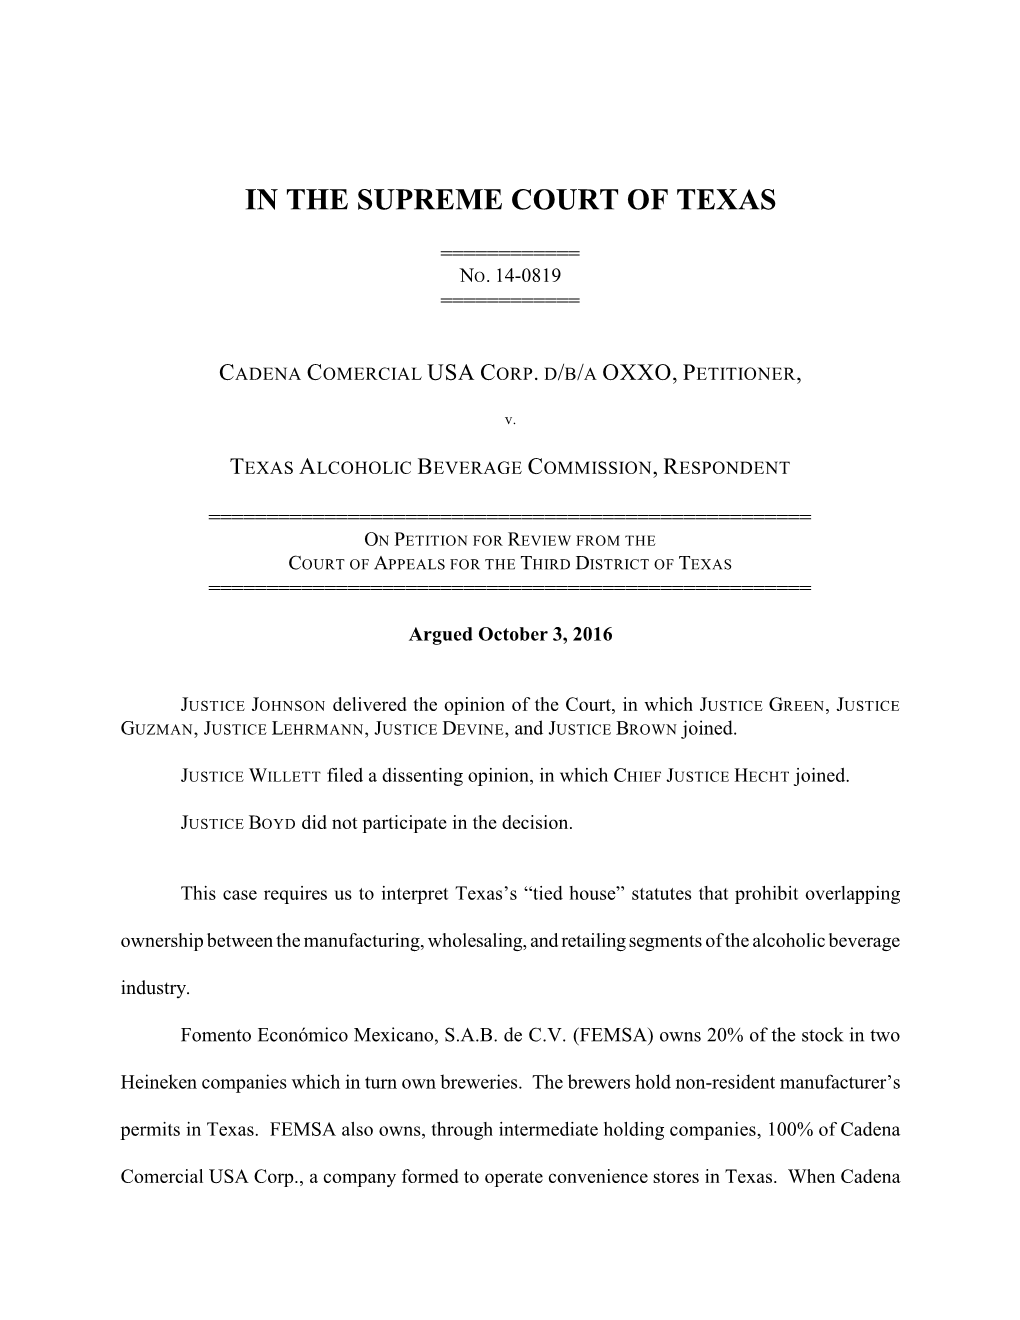 Opinion of the Court, in Which JUSTICE GREEN, JUSTICE GUZMAN, JUSTICE LEHRMANN, JUSTICE DEVINE, and JUSTICE BROWN Joined